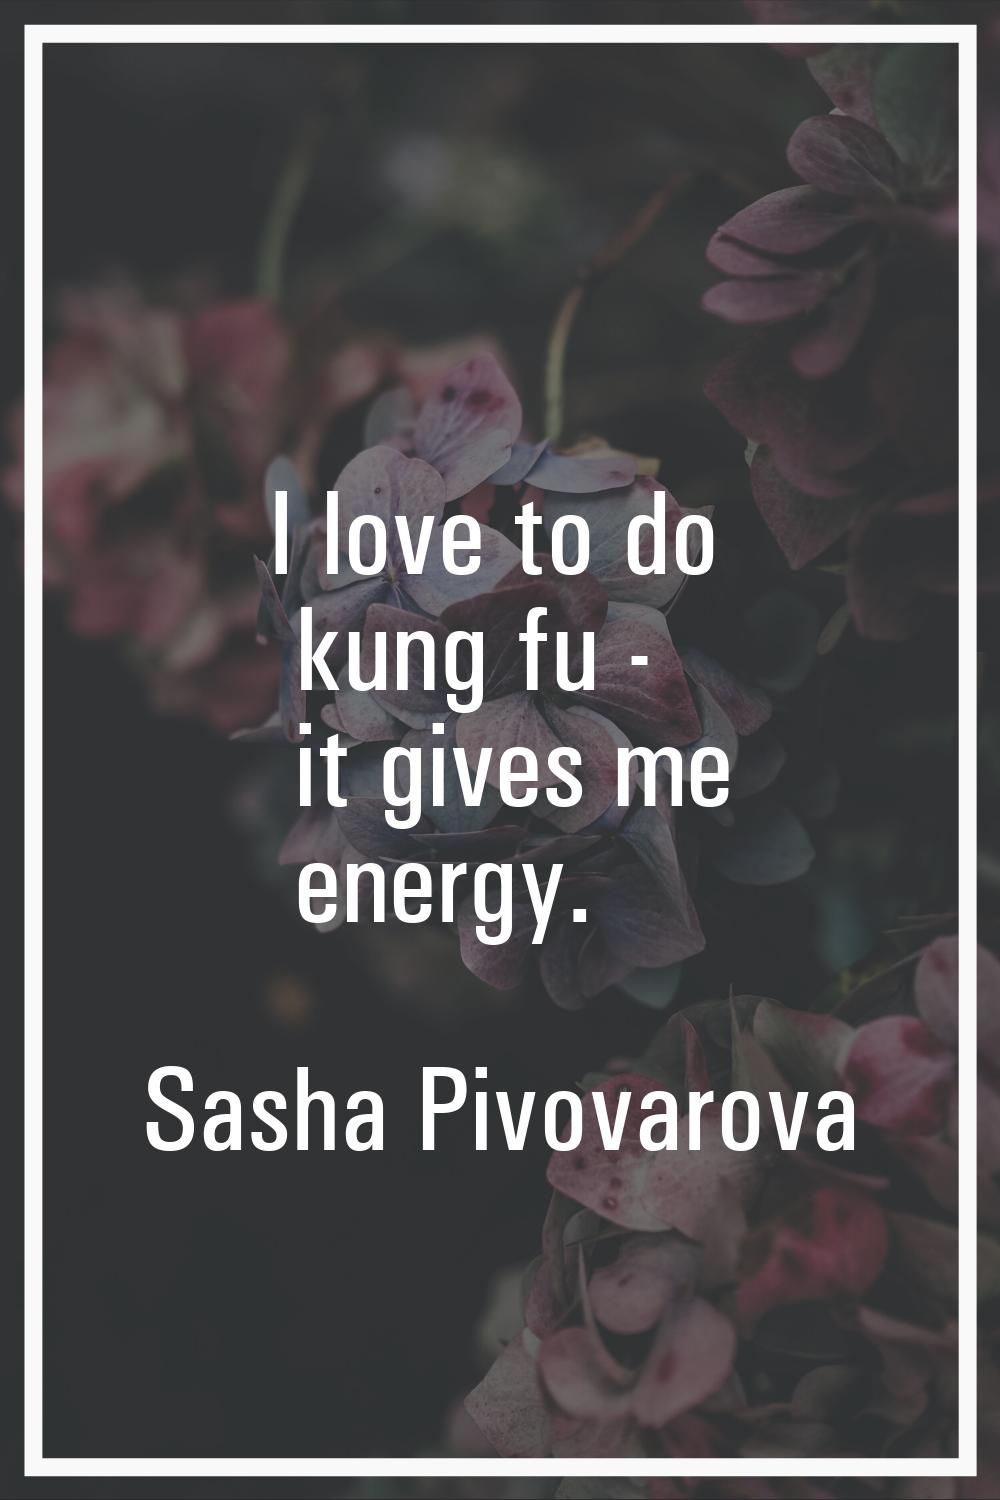 I love to do kung fu - it gives me energy.